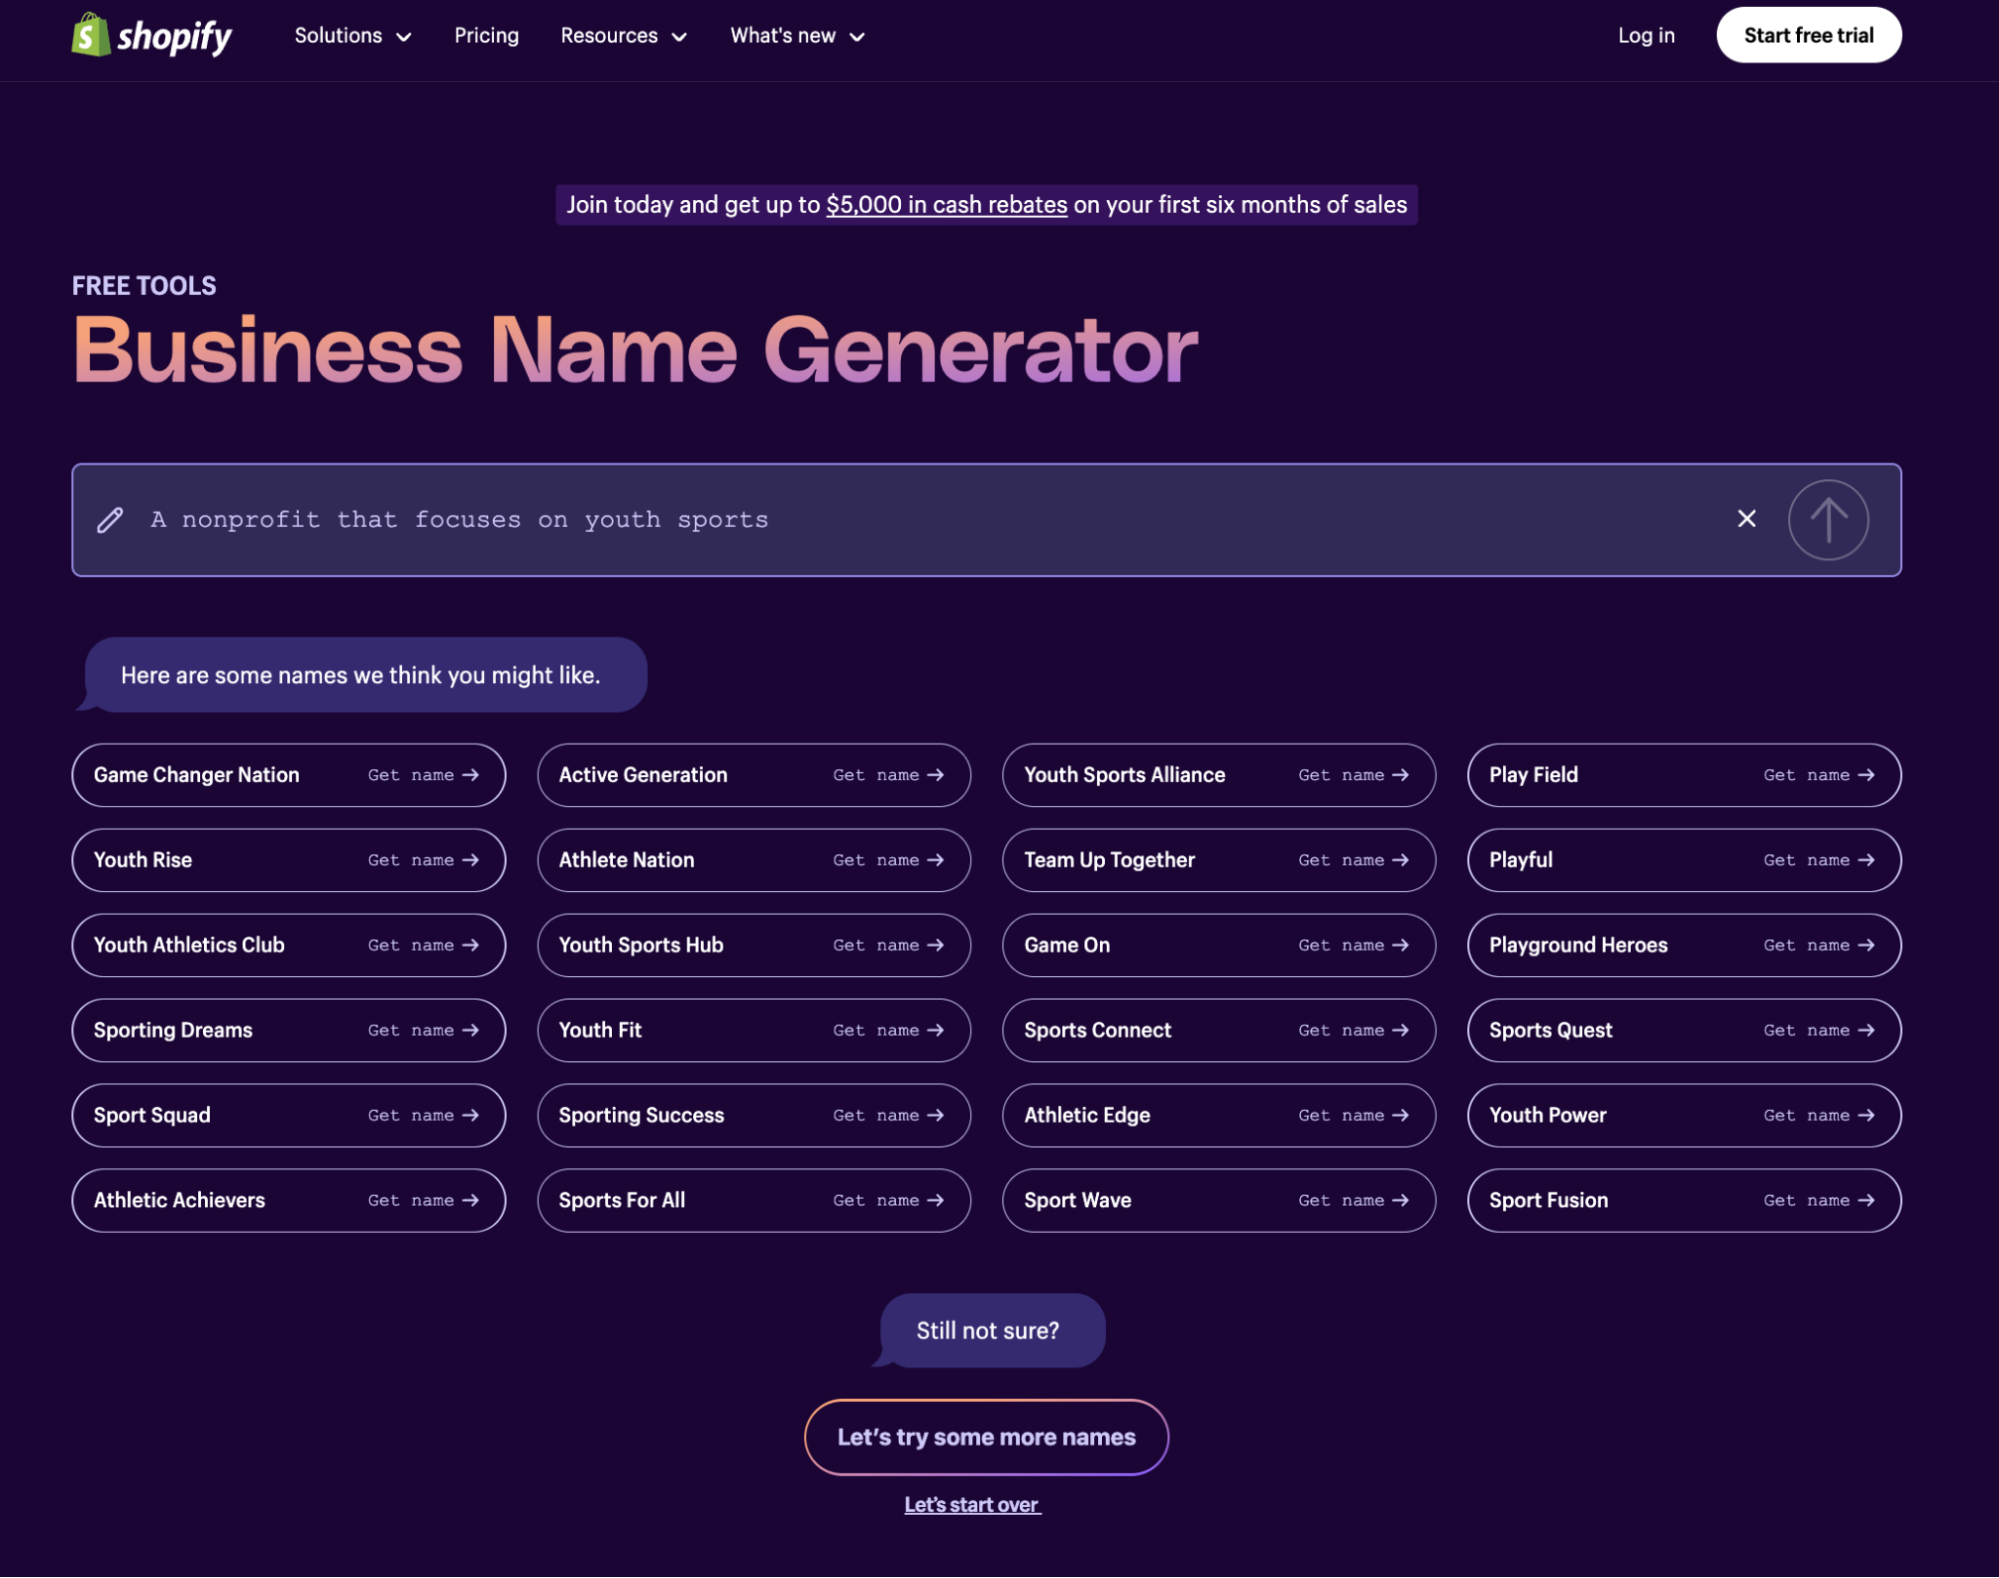 Example of nonprofit organization names generated by Shopify’s business name generator